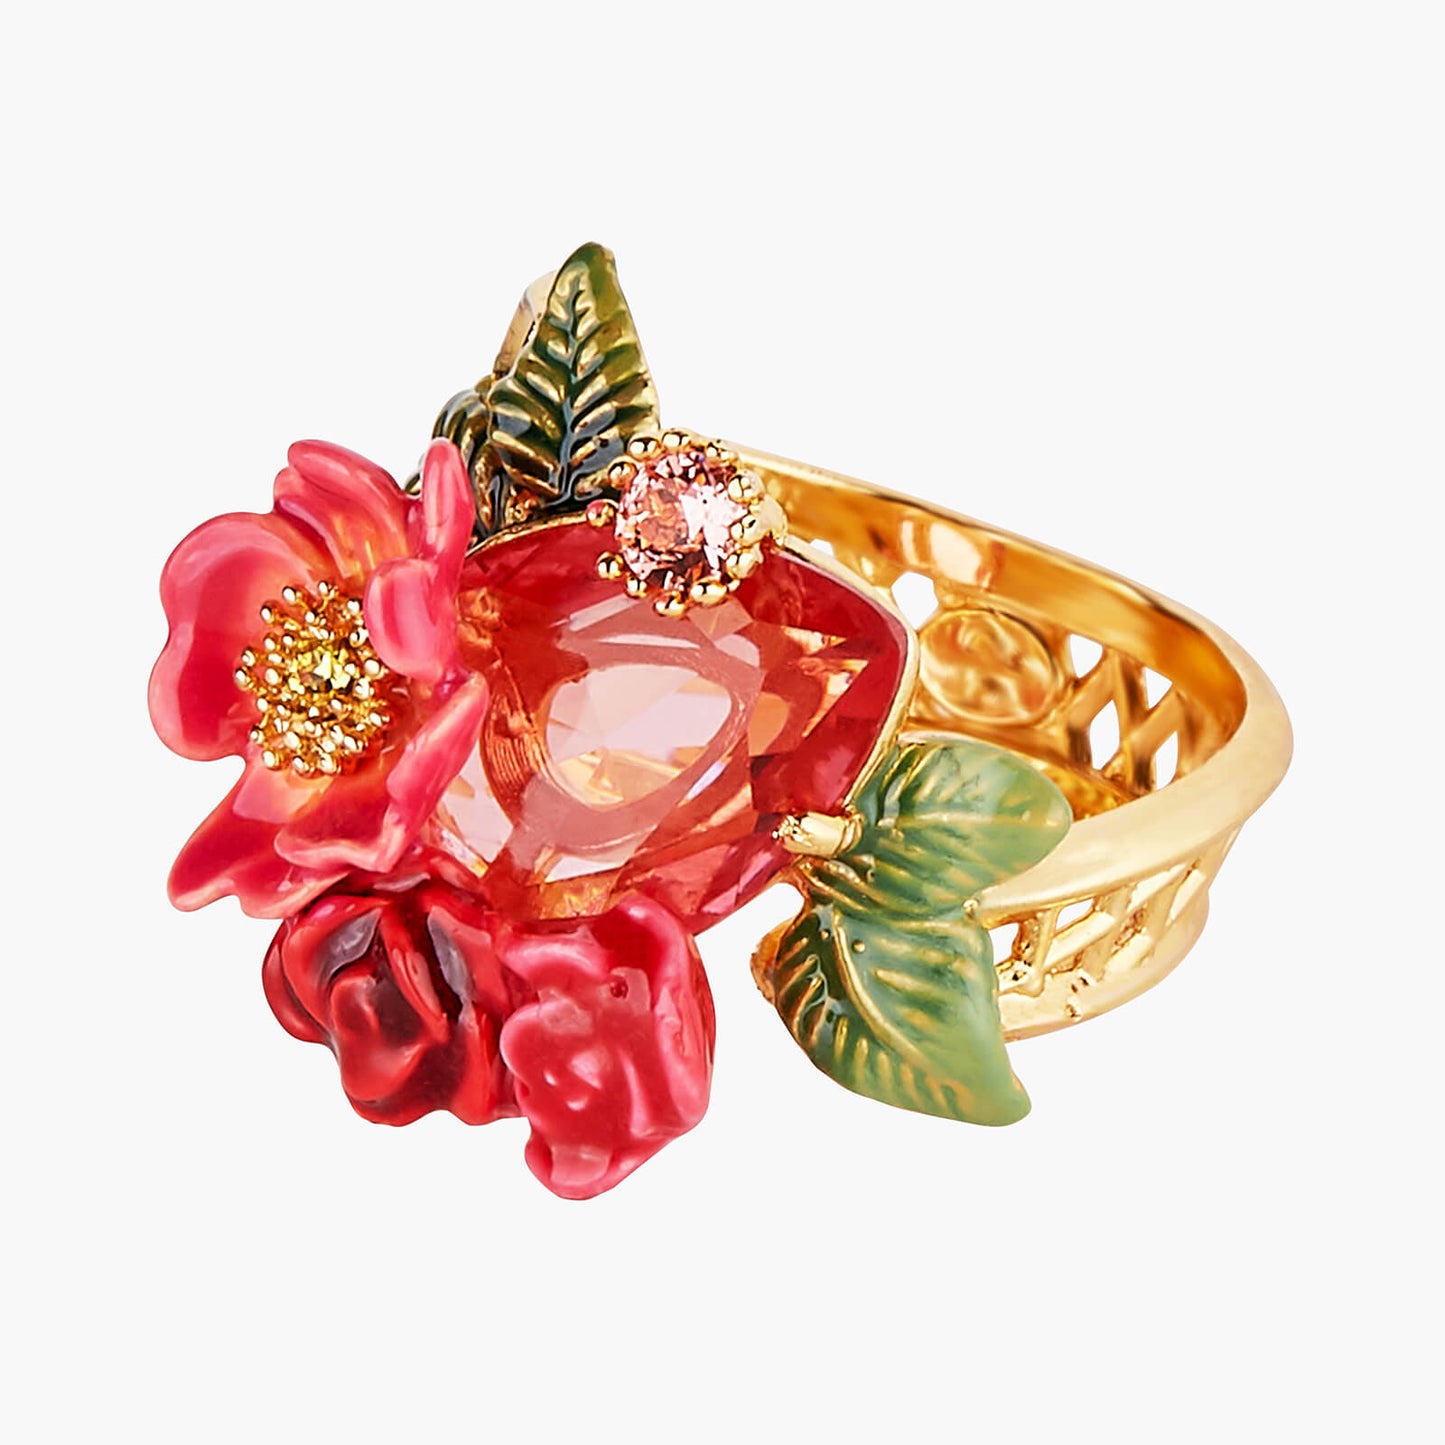 Antique And Wild Roses Cocktail Rings | AMAR605/11